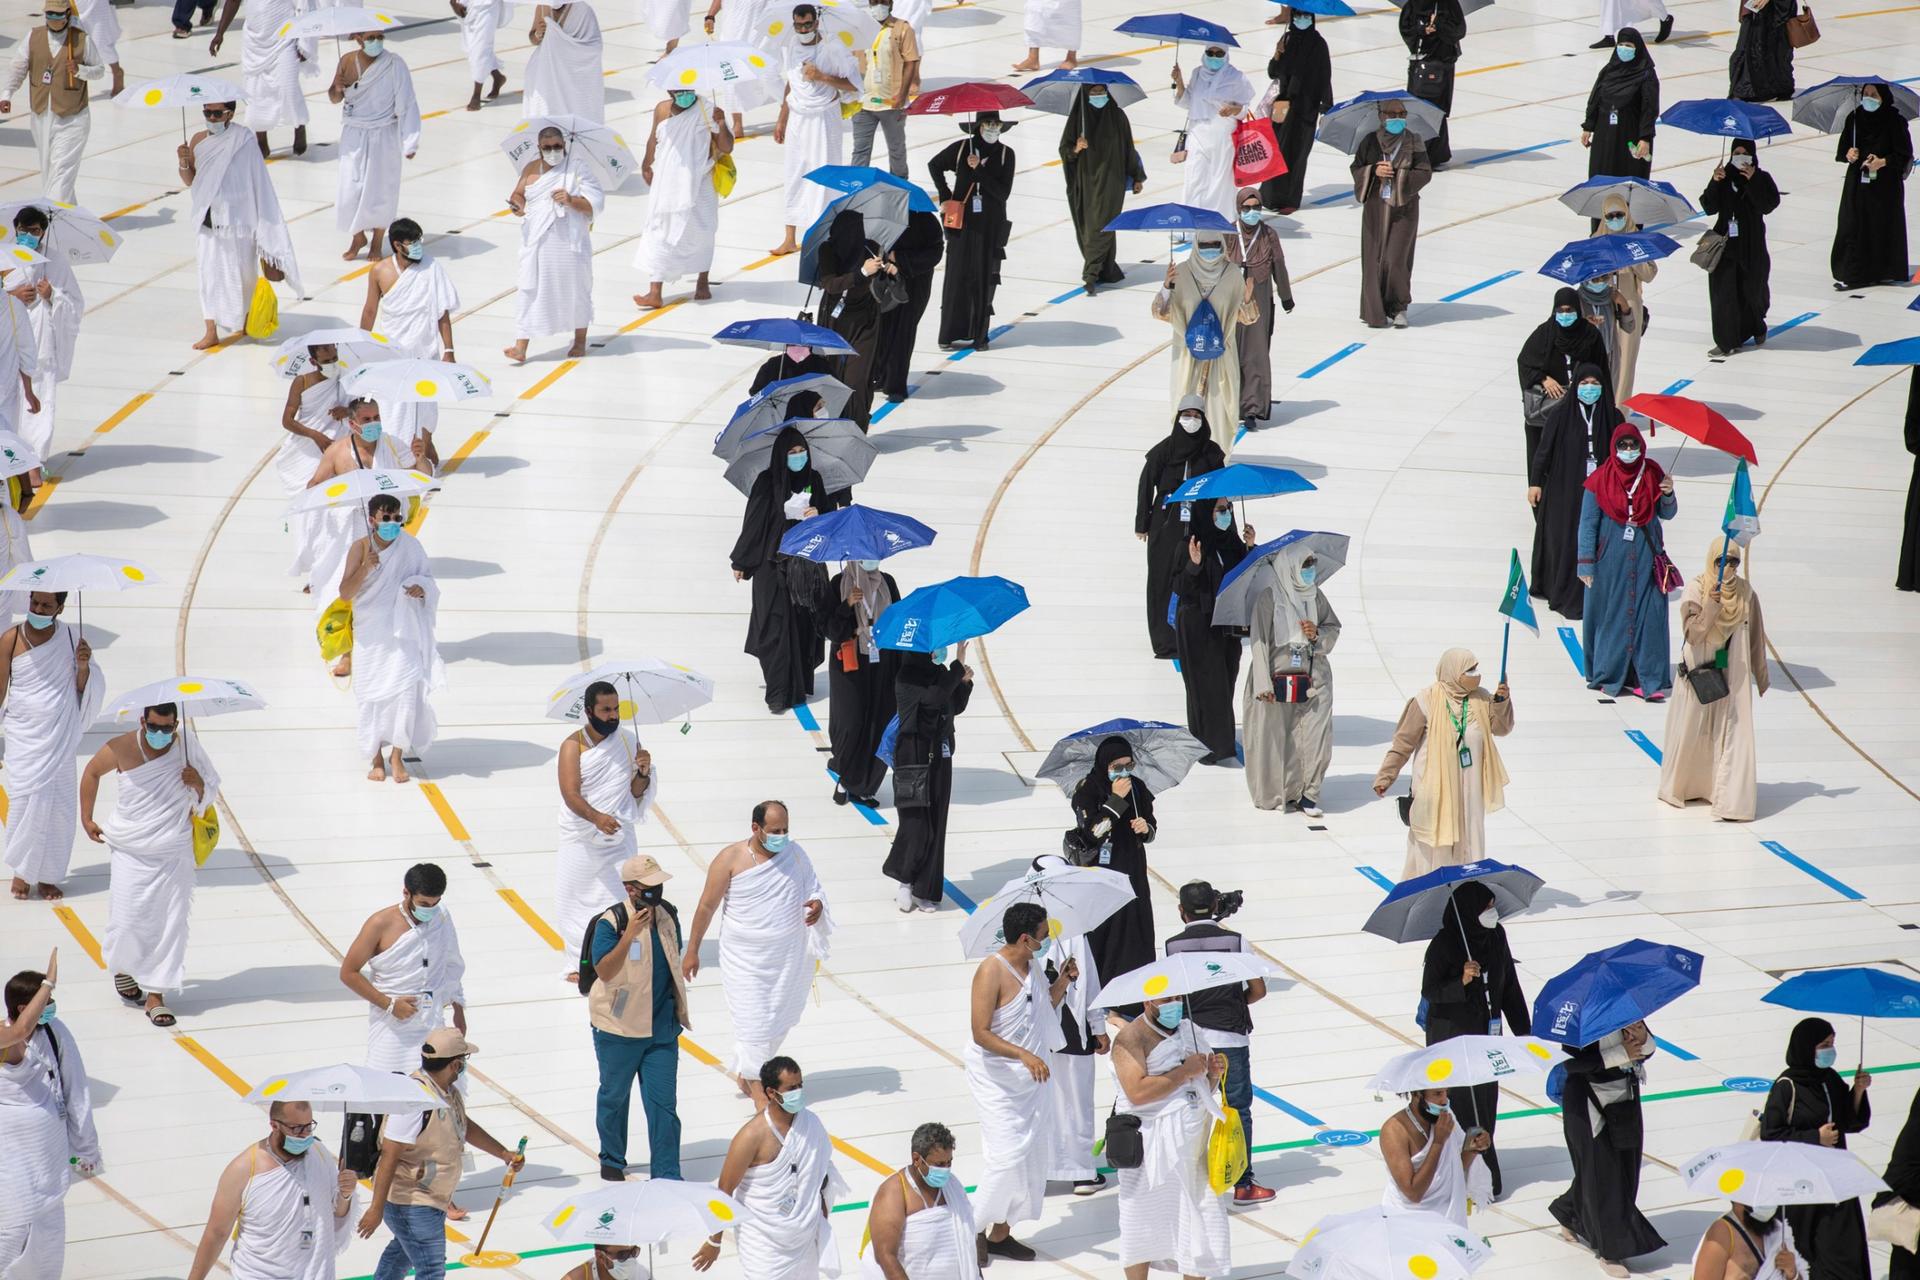 Pilgrims are shown walking on designated lines circuling the Kaaba.